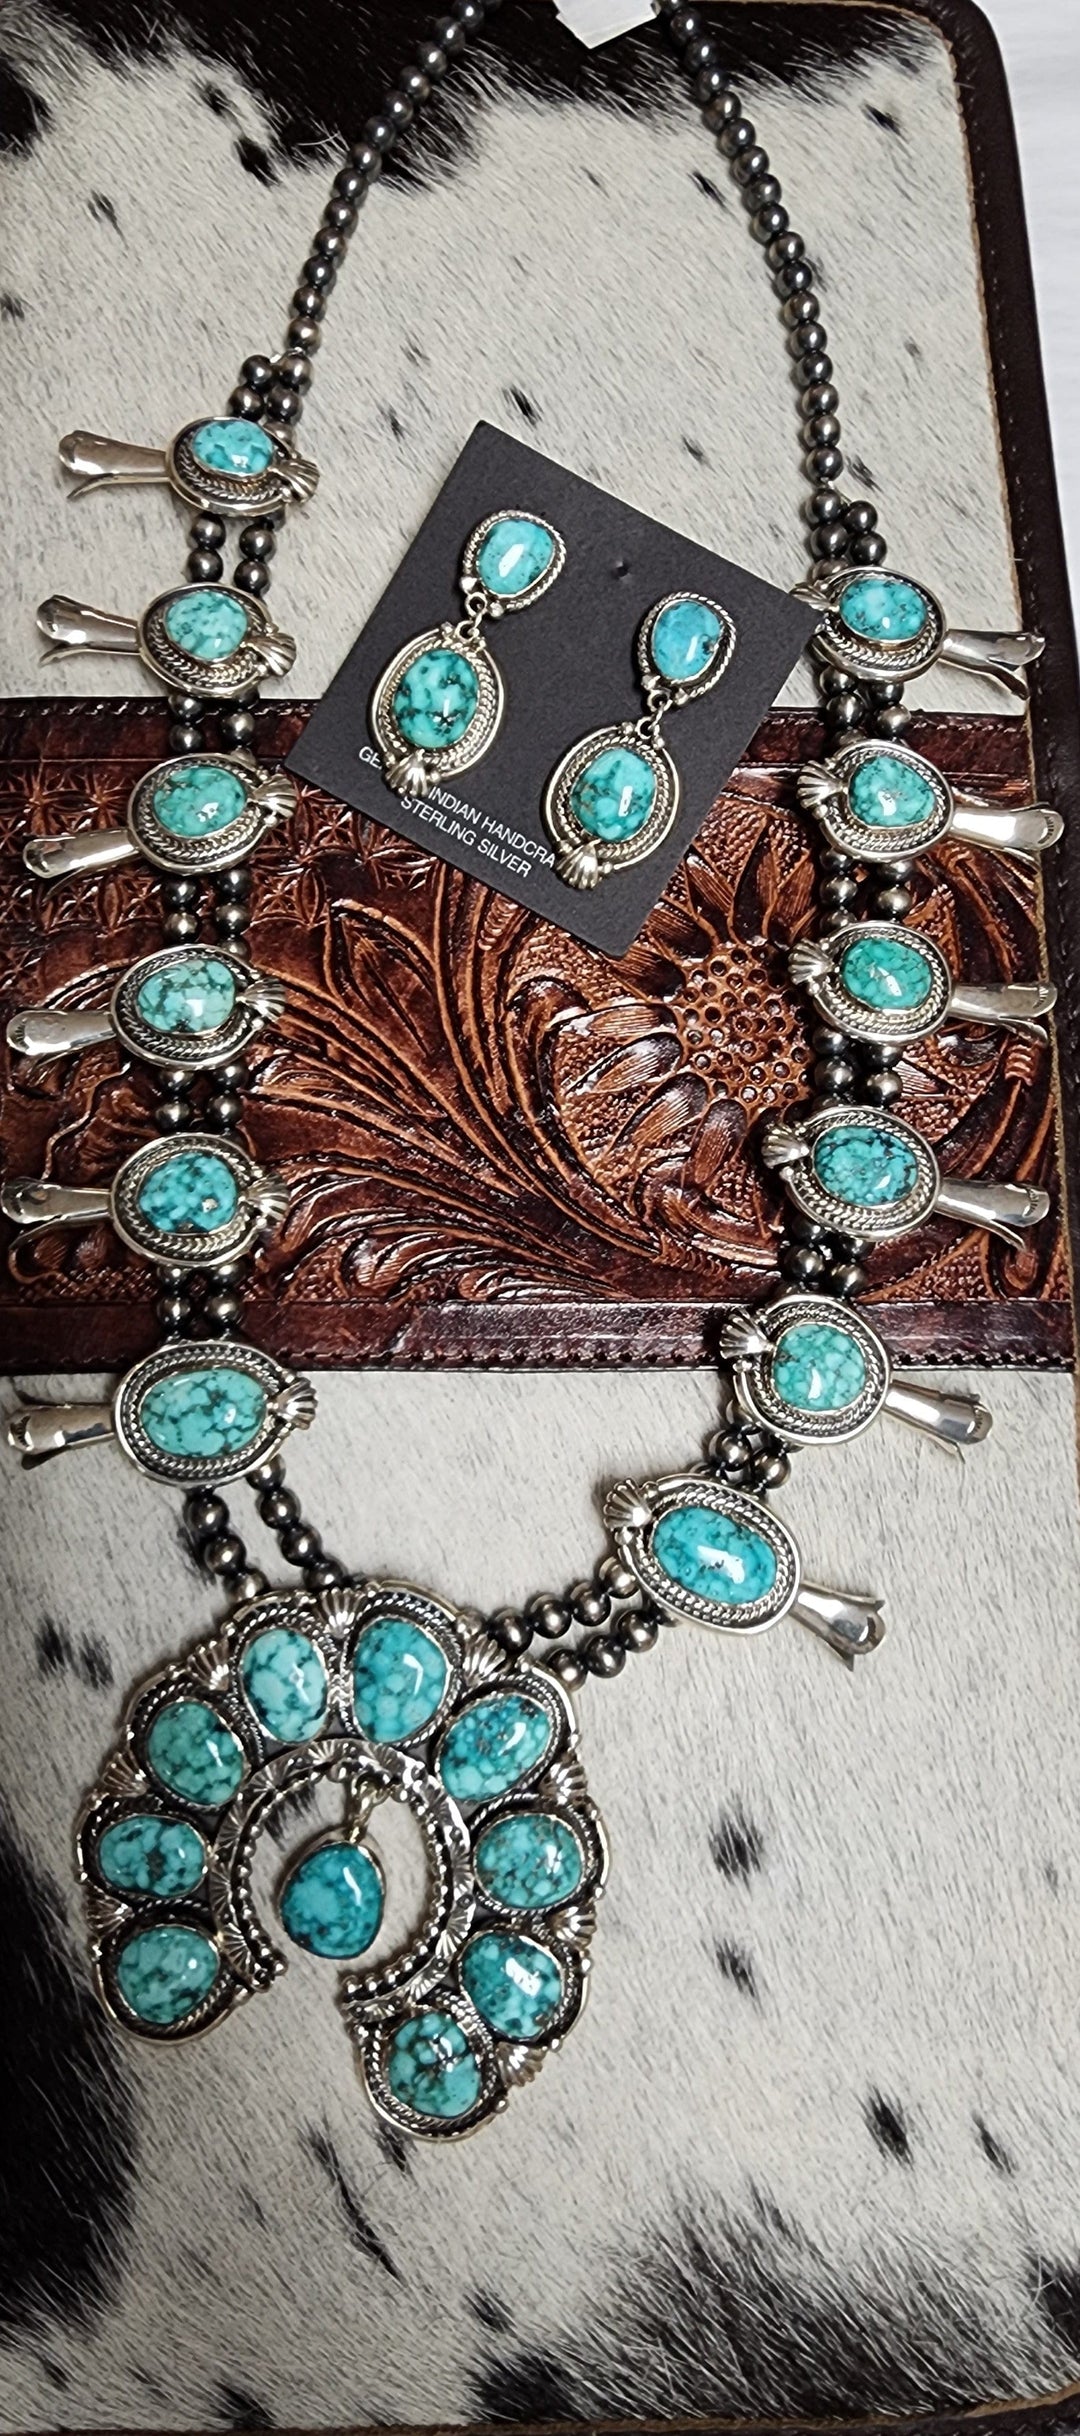 Kingman Turquoise Squash Blossom Necklace and Earrings Jypsy Sisters